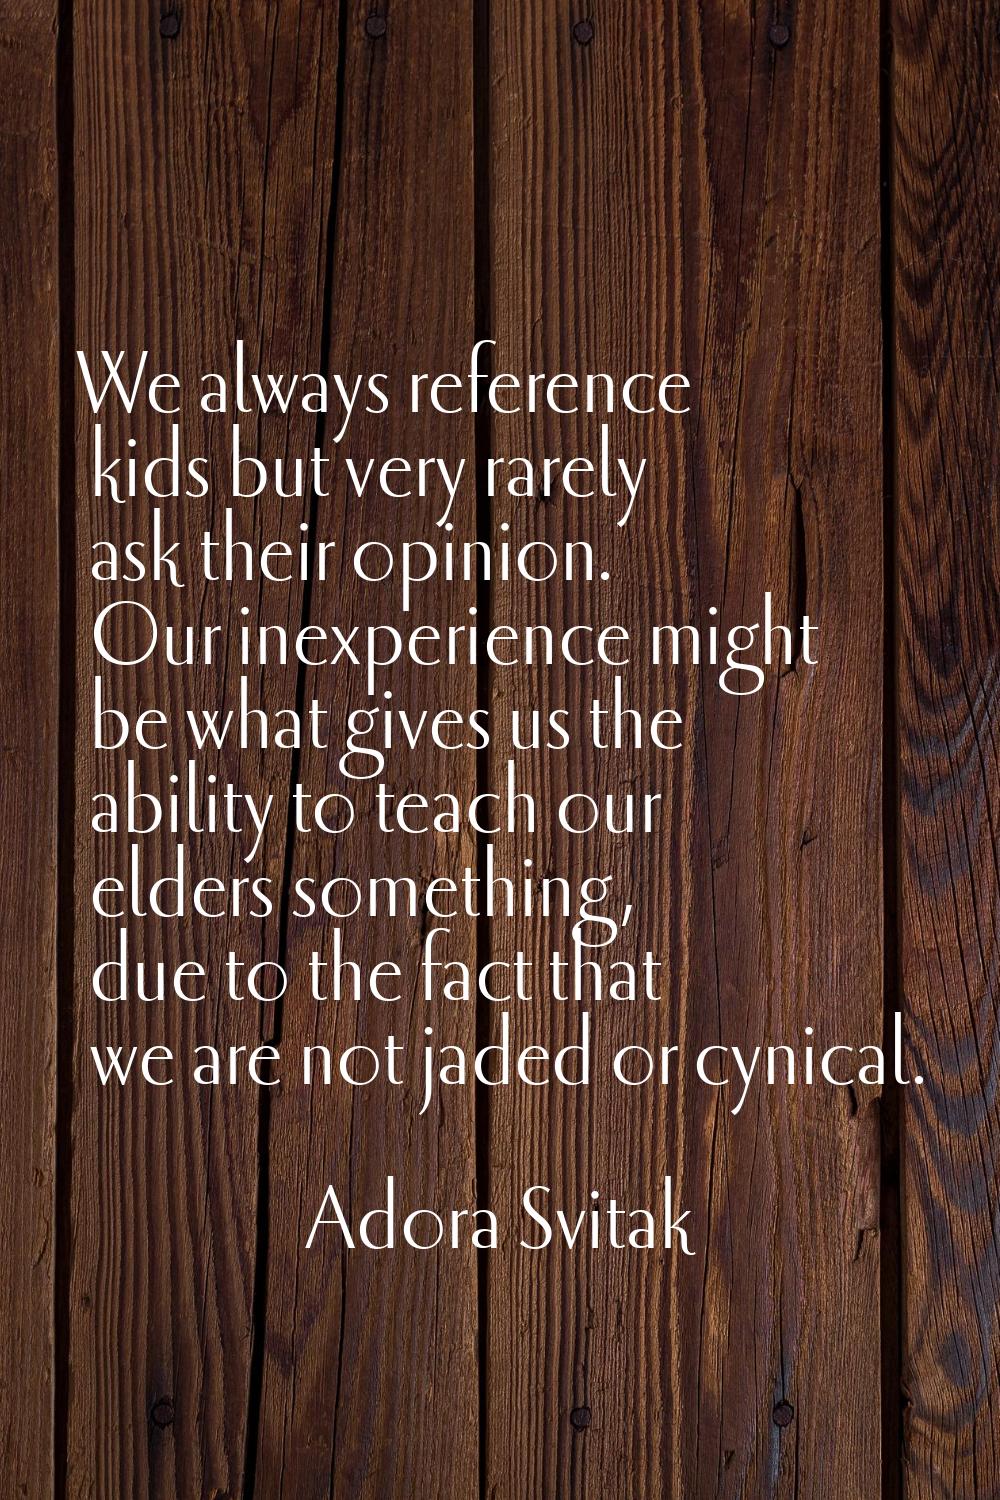 We always reference kids but very rarely ask their opinion. Our inexperience might be what gives us